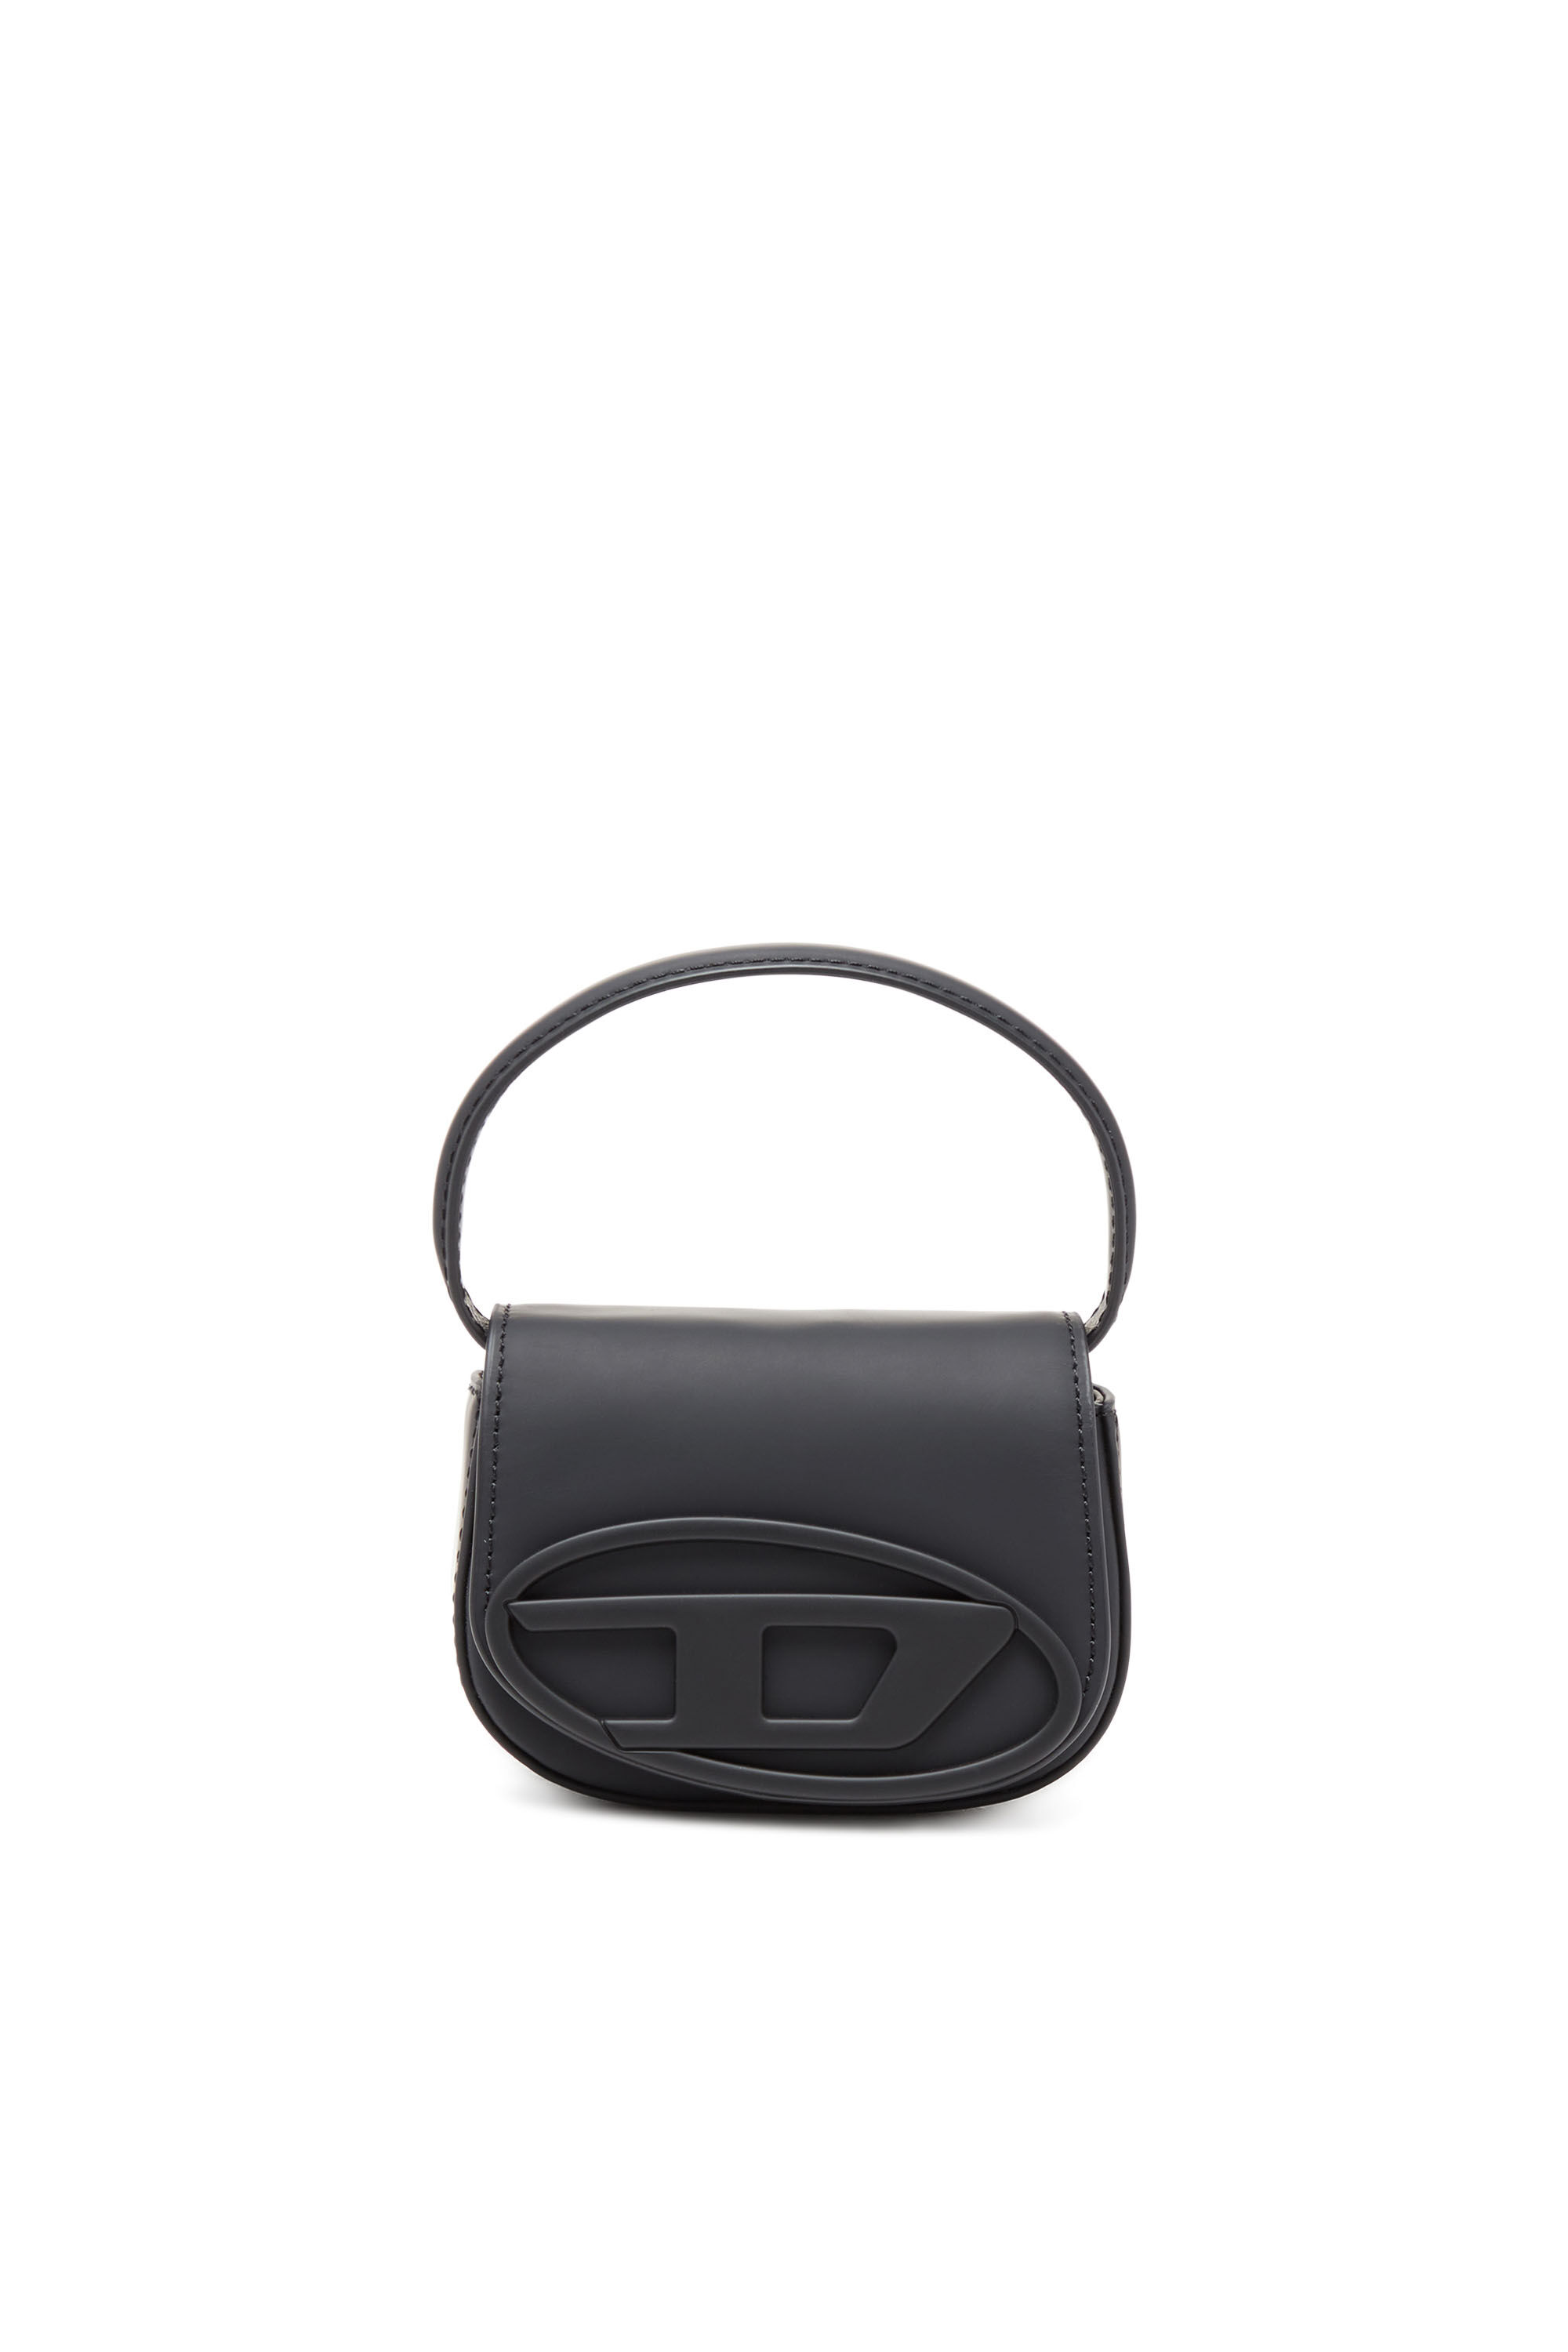 Diesel - 1DR XS, Woman 1DR Xs-Iconic mini bag in matte leather in Black - Image 6